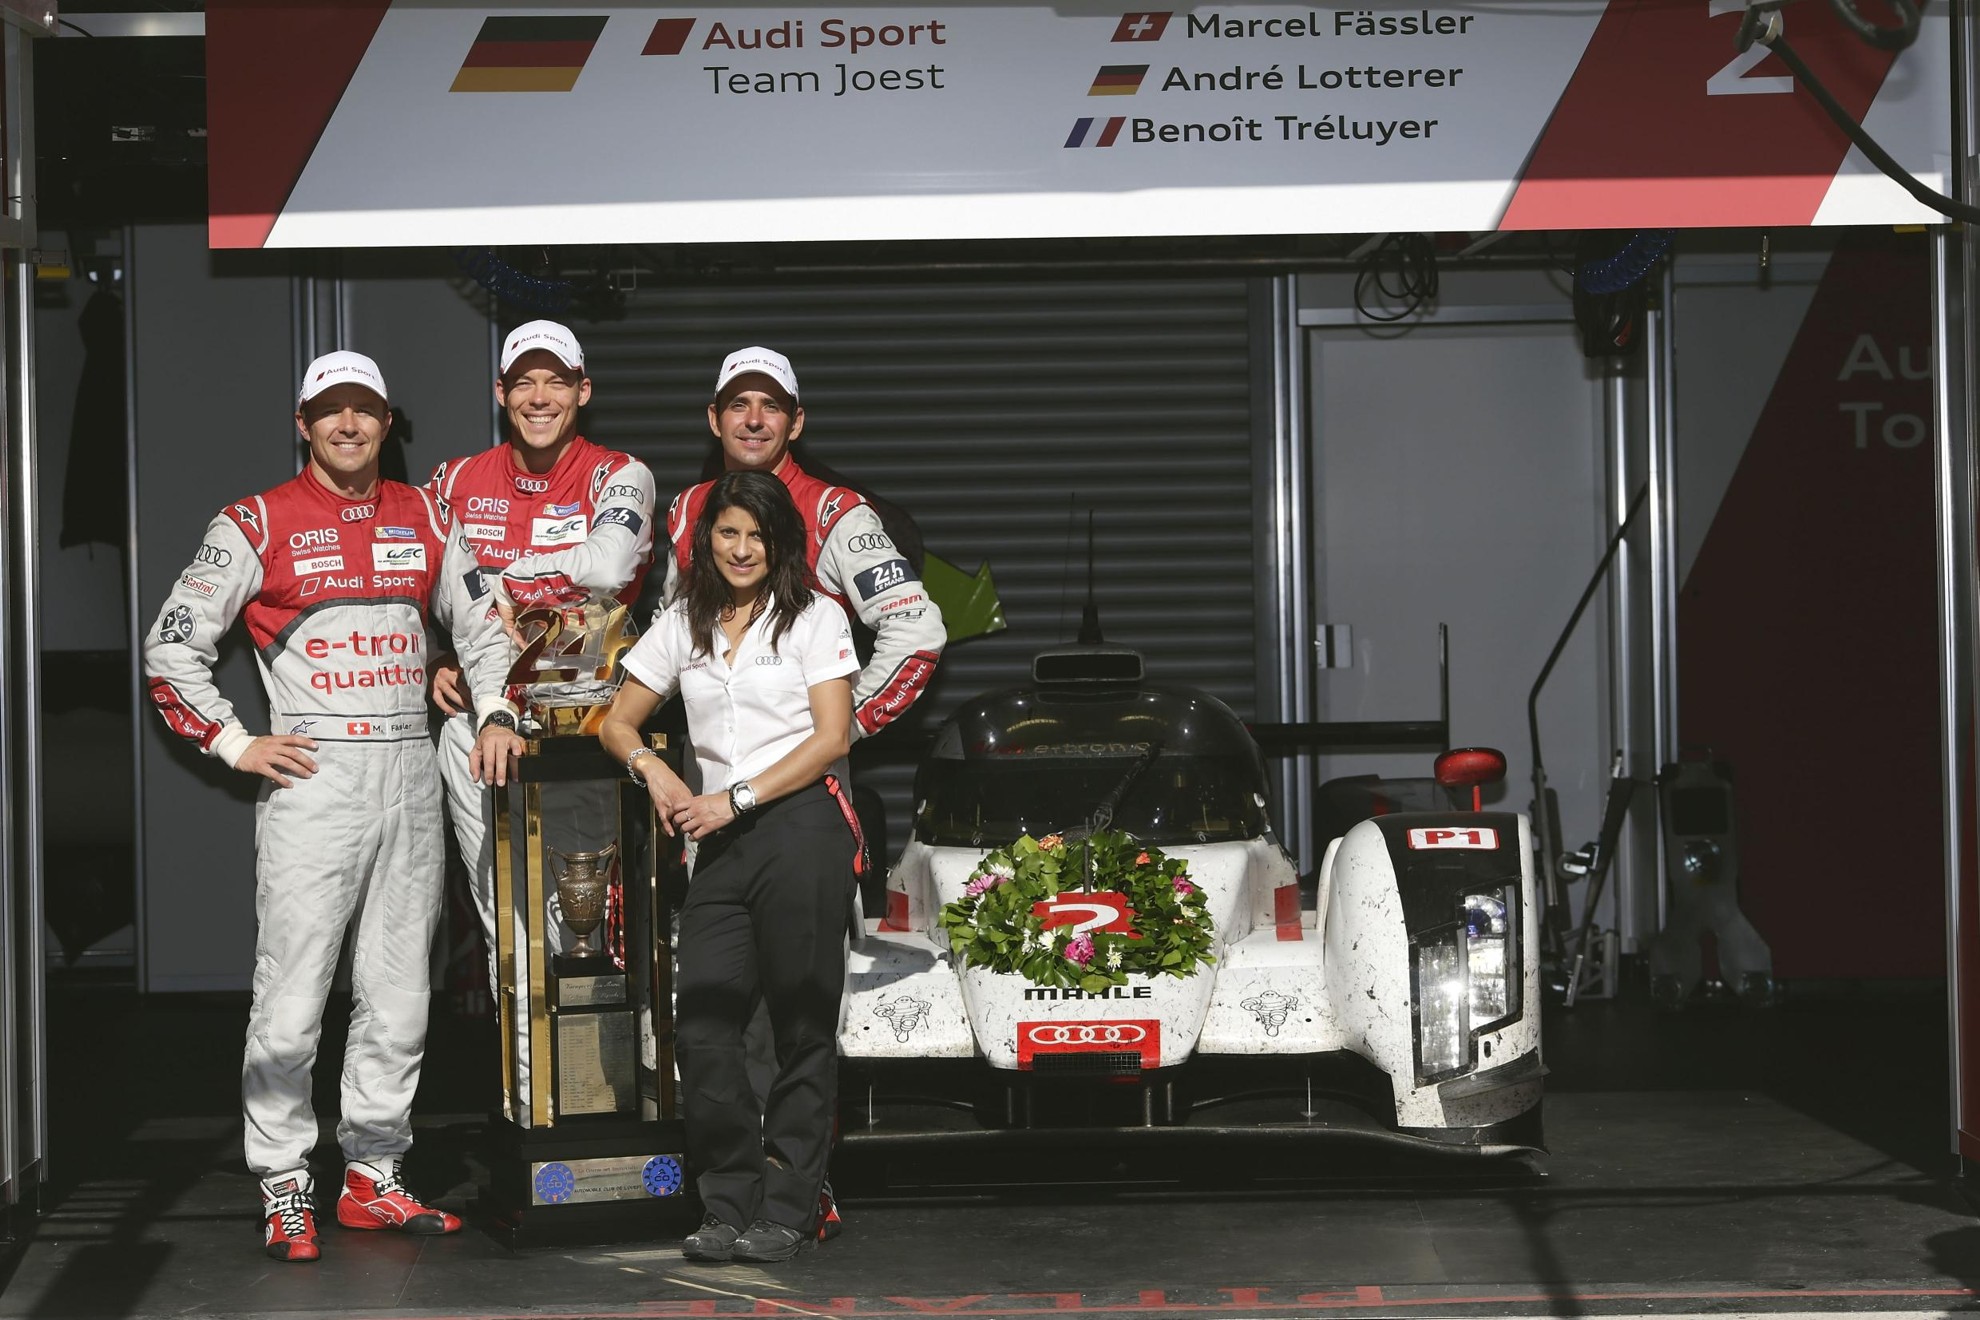 FACTS ON THE 13TH LE MANS VICTORY OF AUDI